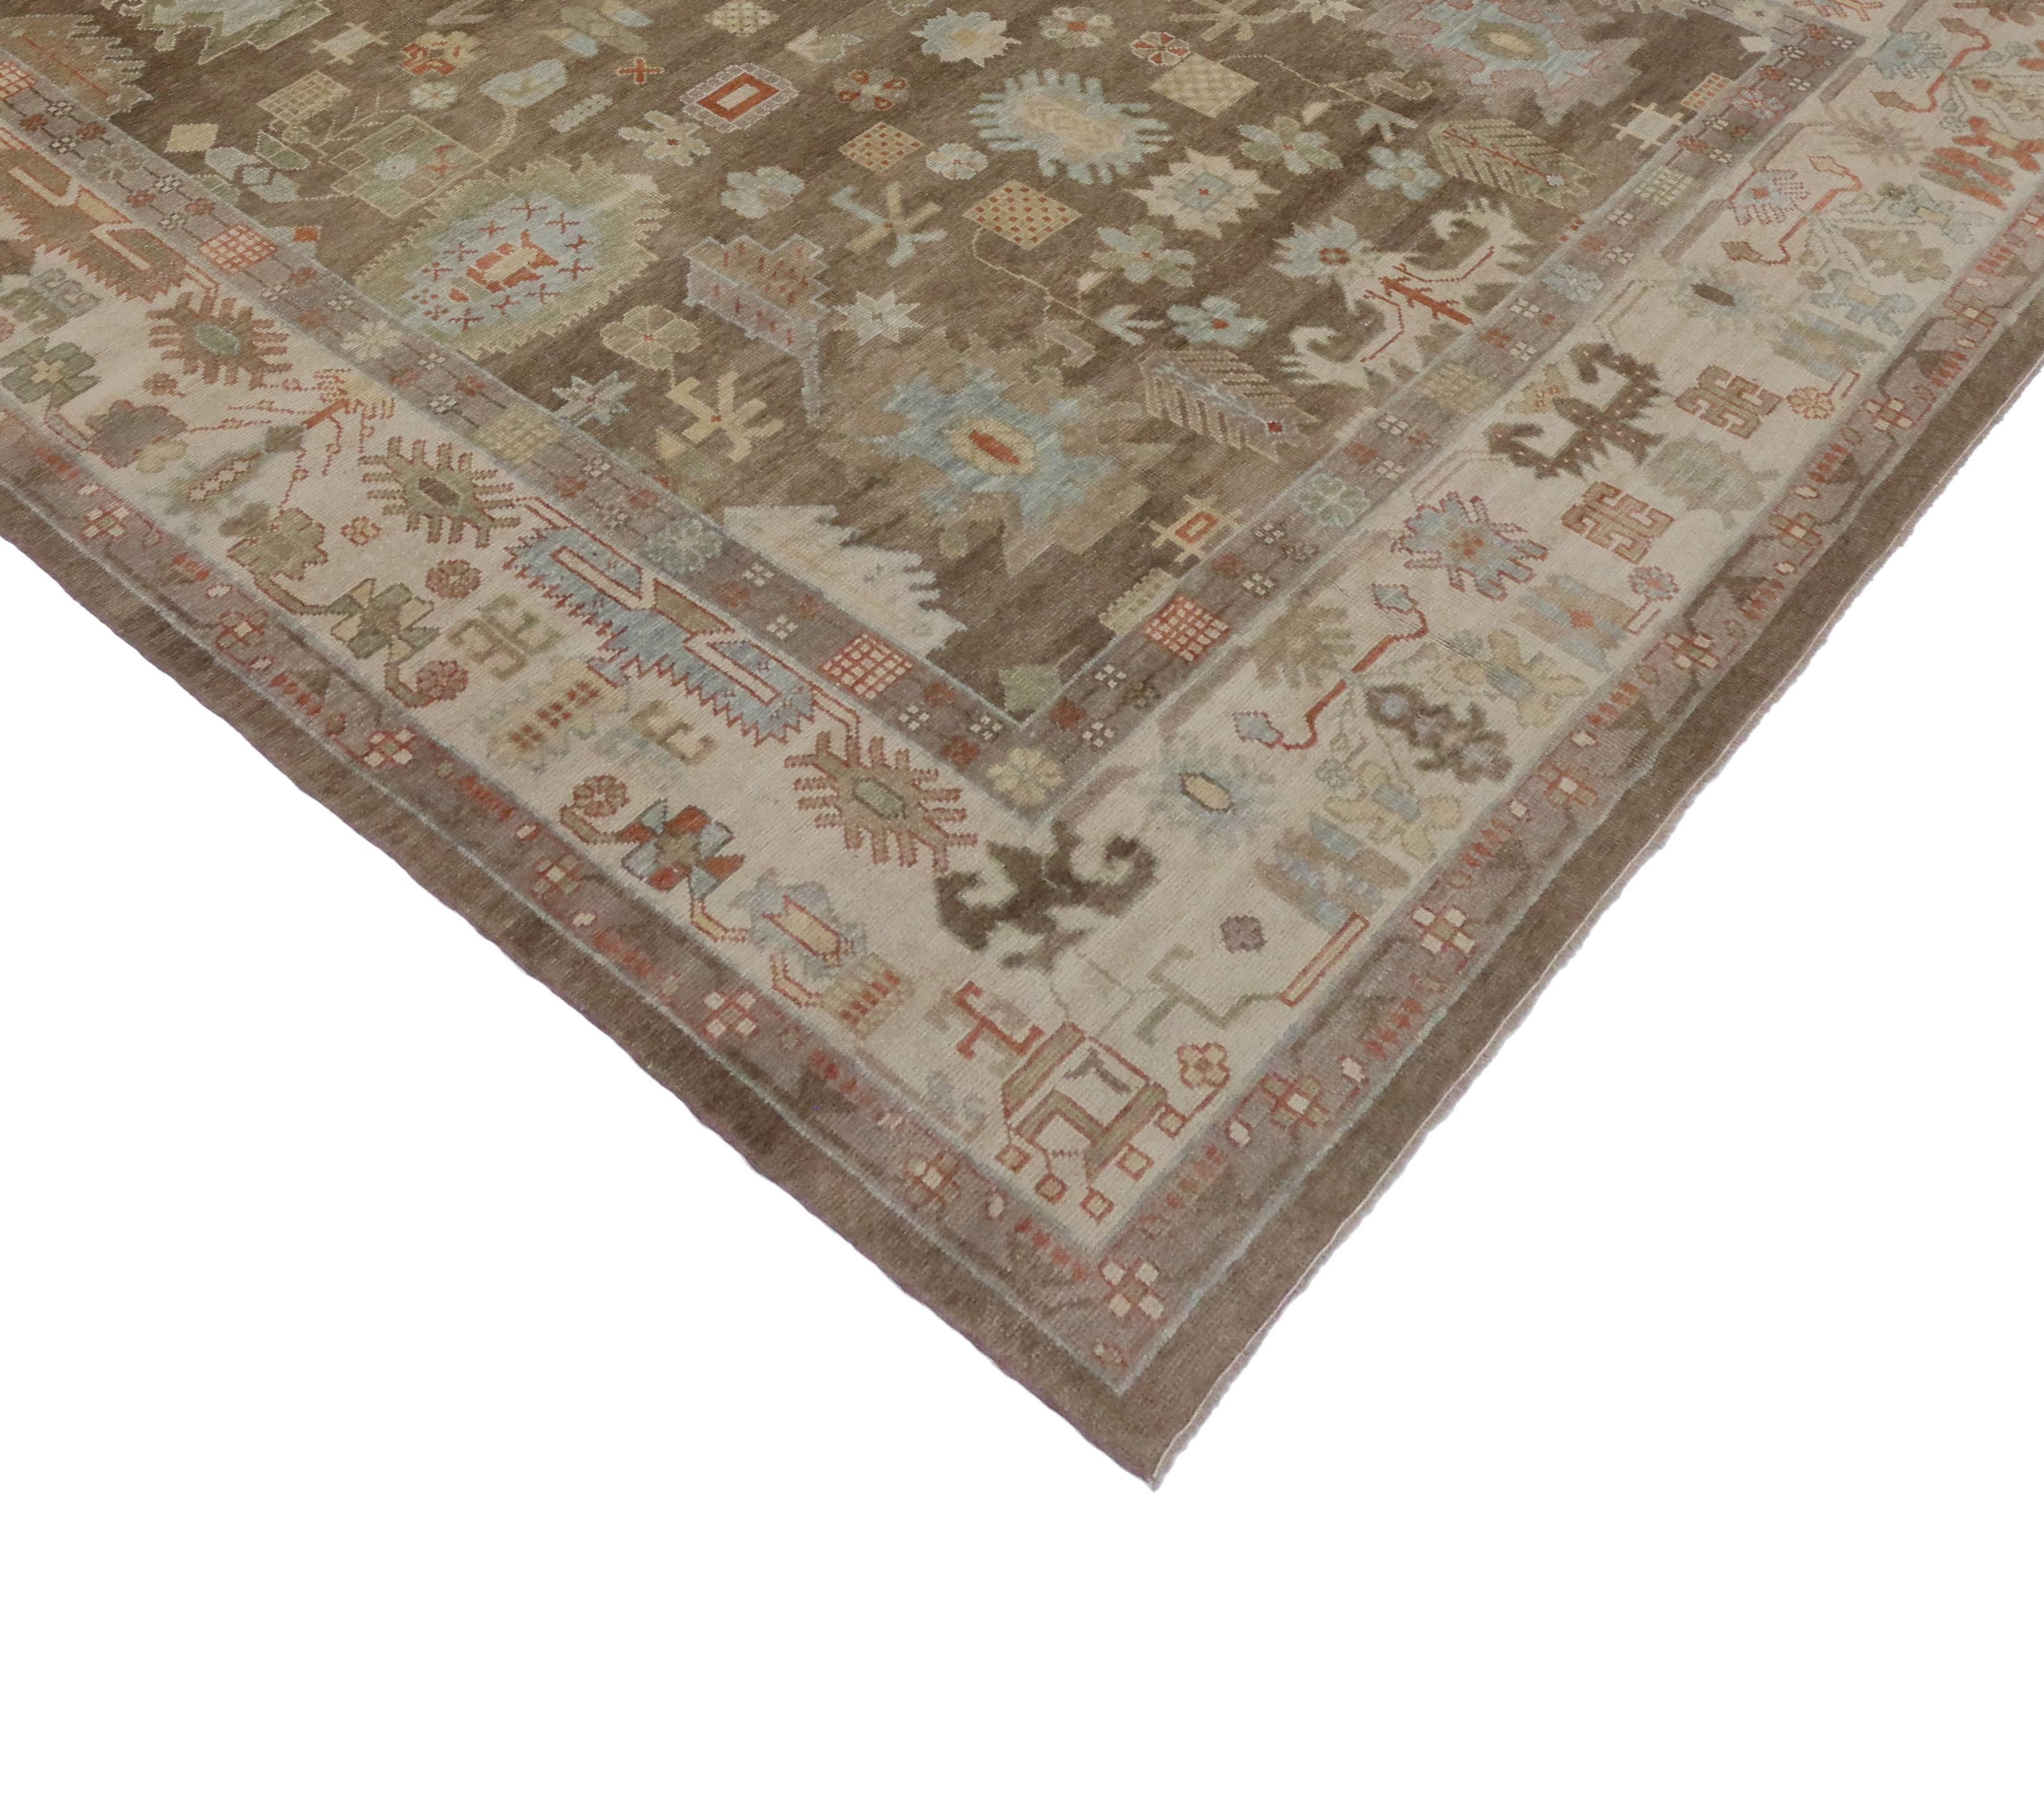 50853 New Contemporary Turkish Oushak Rug with Transitional Style with A Pop of Color 10'00 x 13'01.  Blending elements from the modern world with timeless elegance, this hand knotted wool contemporary Turkish Oushak rug beautifully embodies